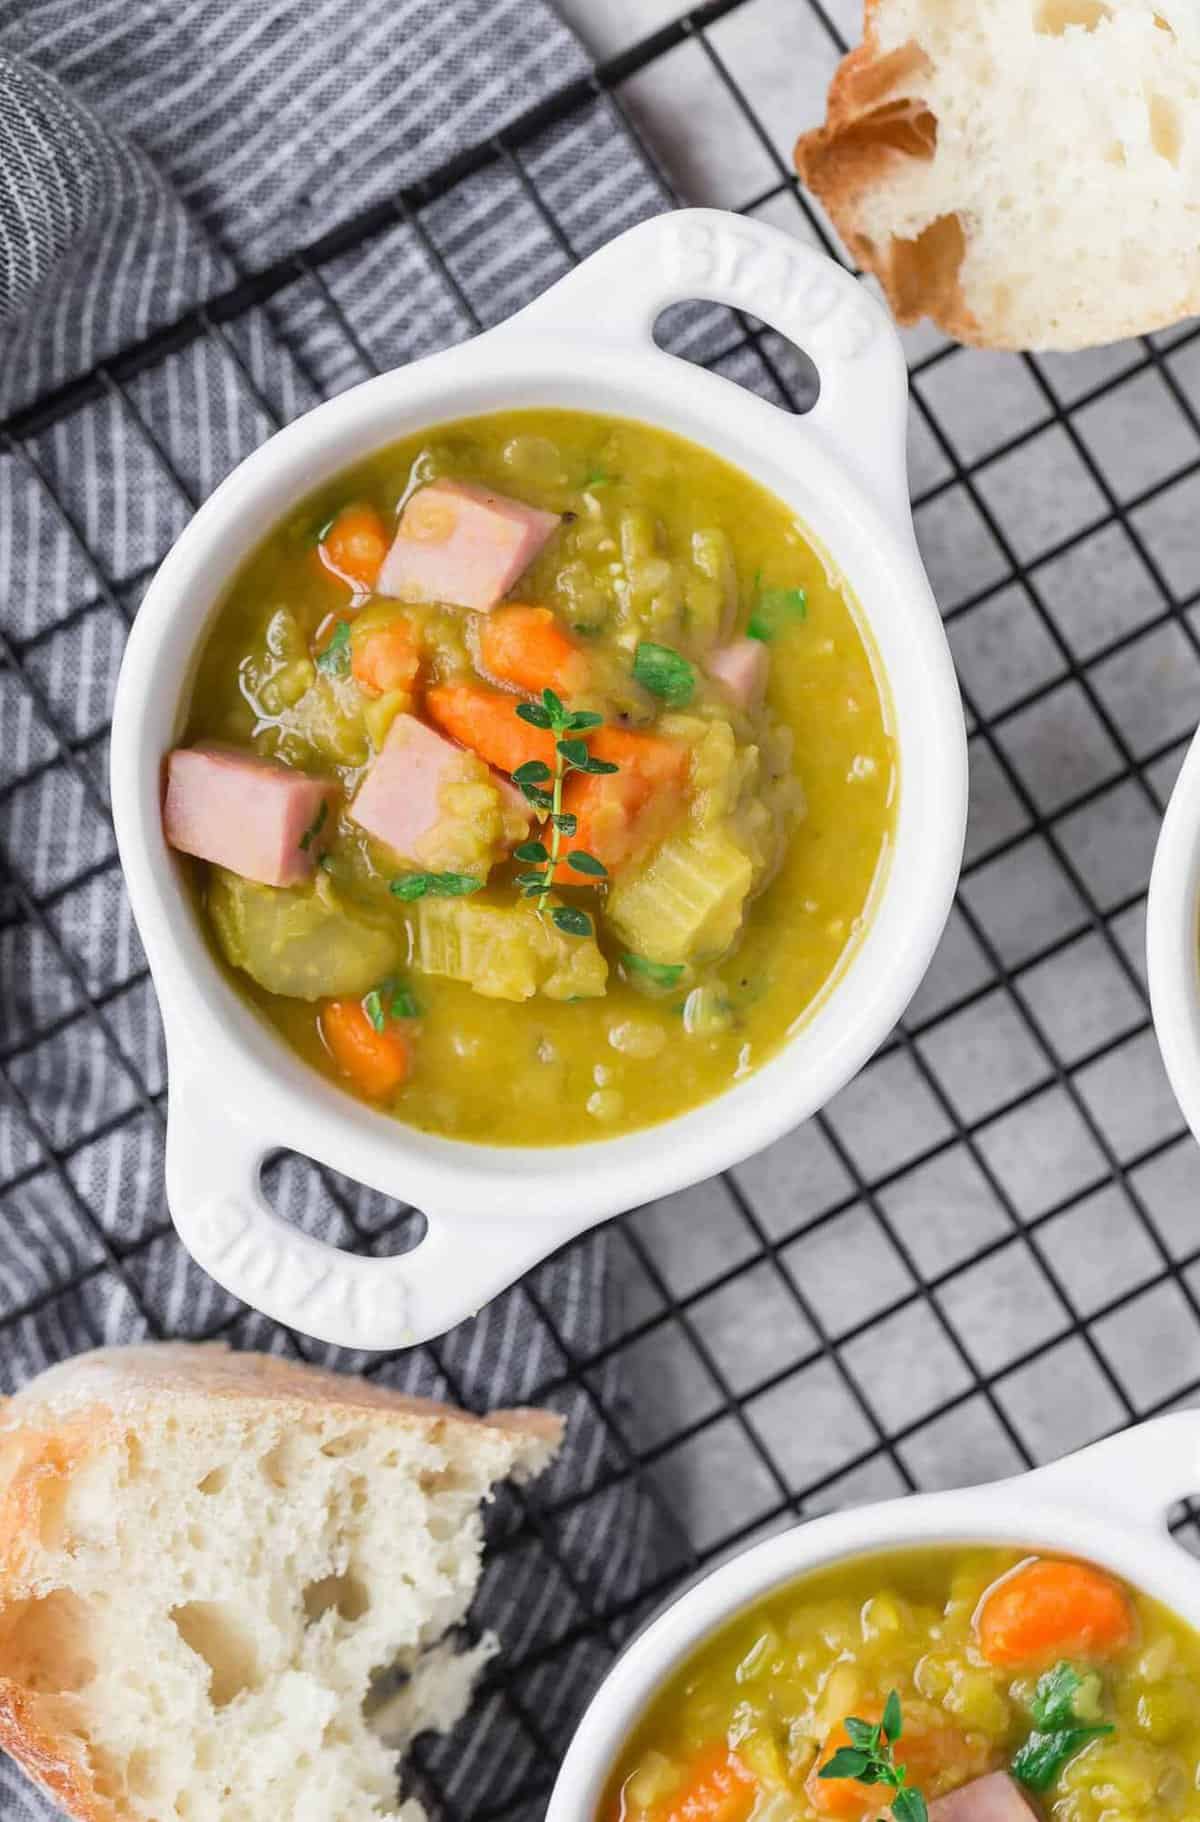  Enjoy a bowl of wholesome goodness with this split pea soup recipe